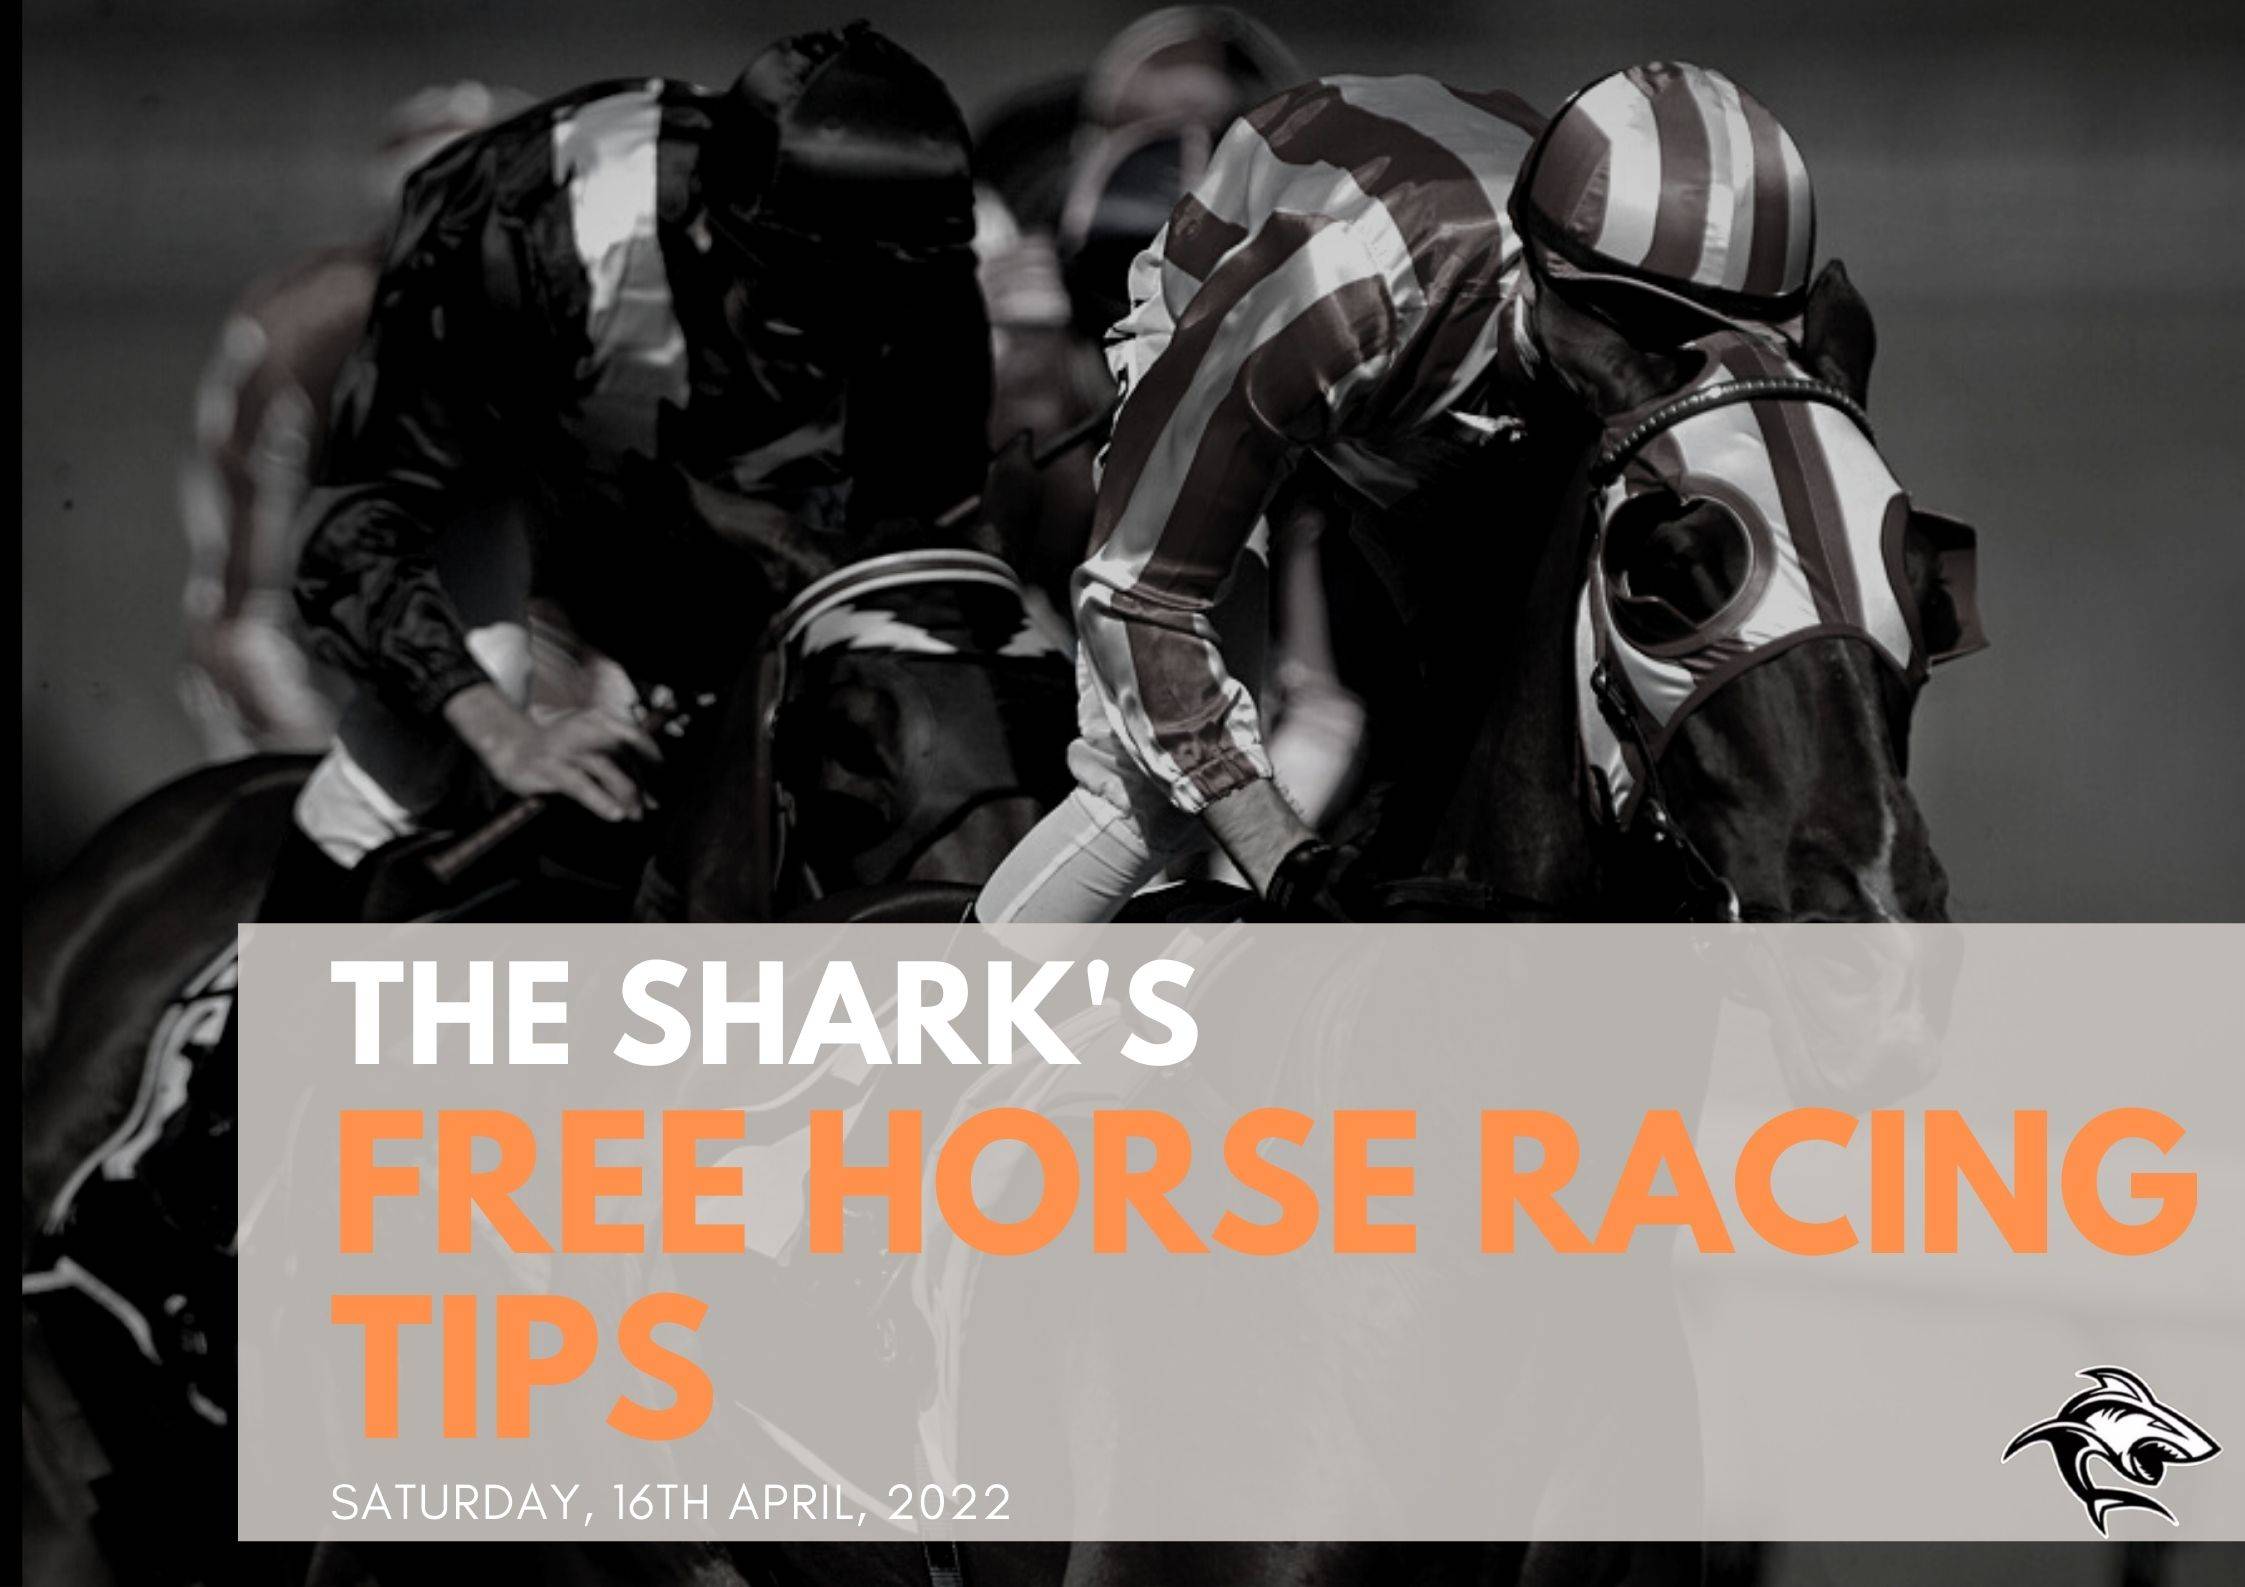 Free Horse Racing Tips - 16th Apr